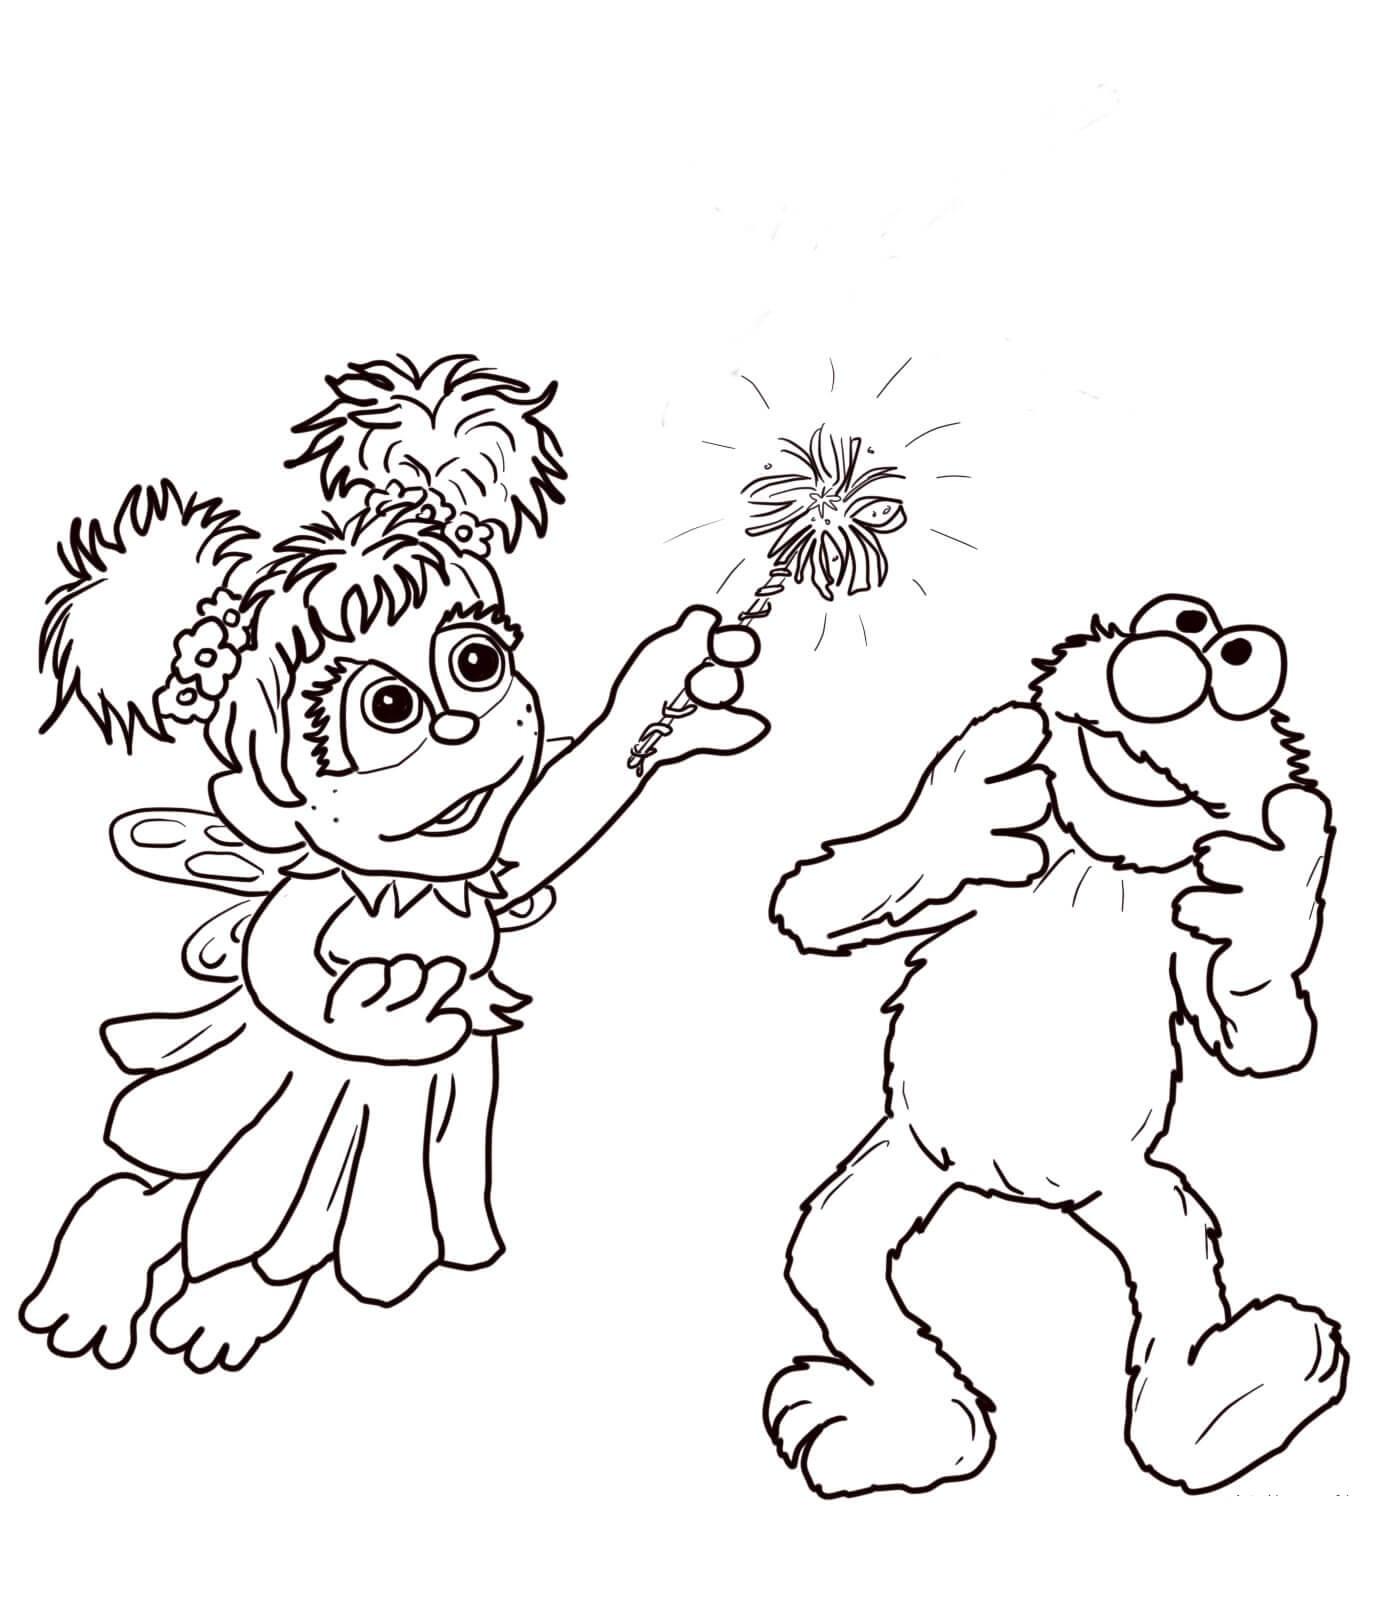 Abby Cadabby Coloring Pages Pdf to Print - Abby Cadabby Sesame Street Coloring Pages